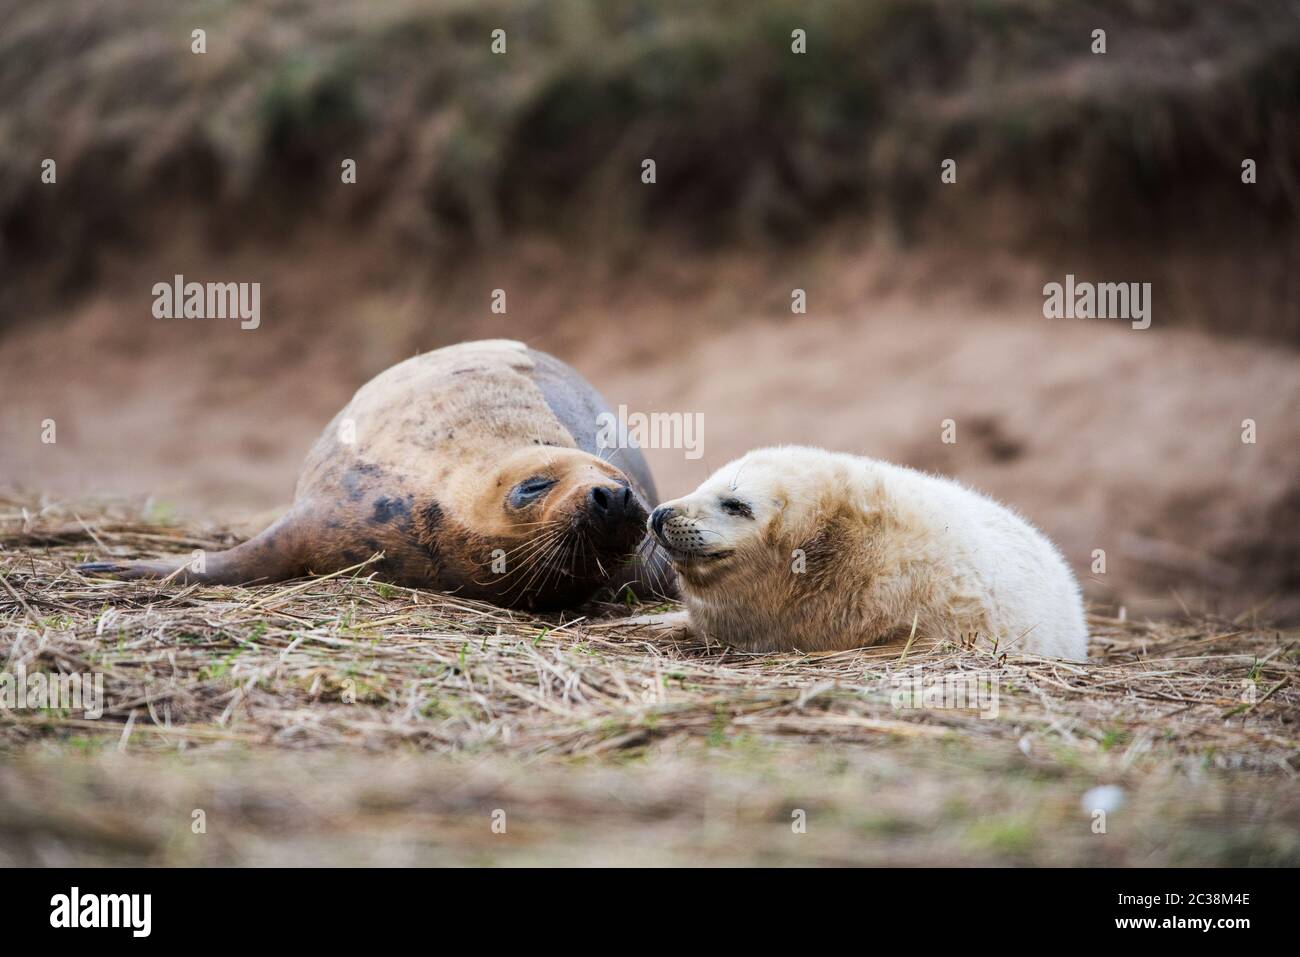 Female with Puppy of Gray seal. Grey Seals come in winter to coastline to give birth to their pups near the sand dunes. Stock Photo